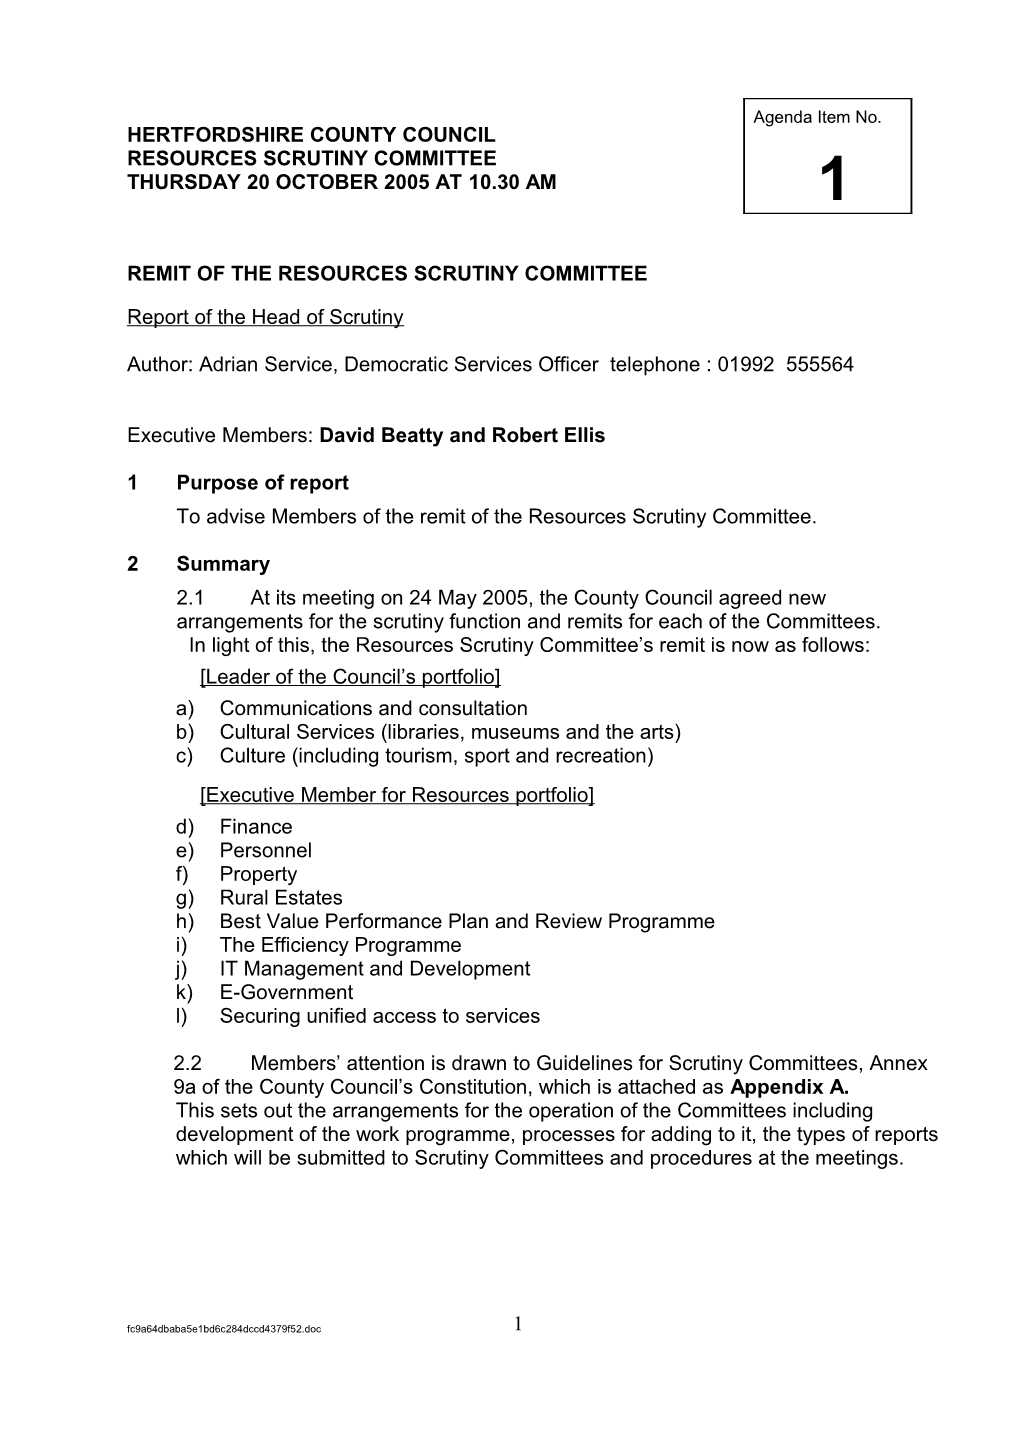 Remit of the Resources Scrutiny Committee